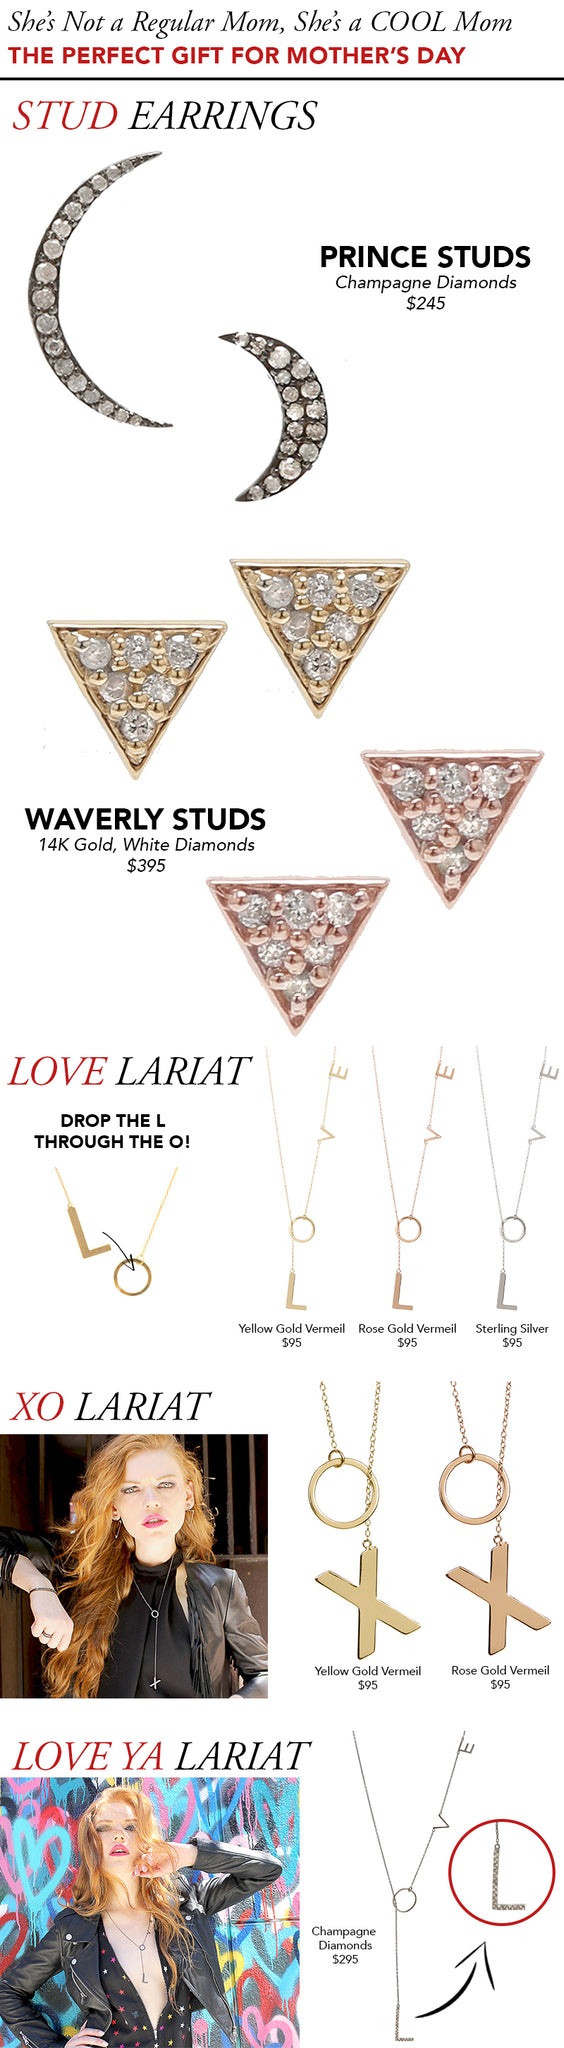 modern jewelry like love lariats perfect for a mother's day gift